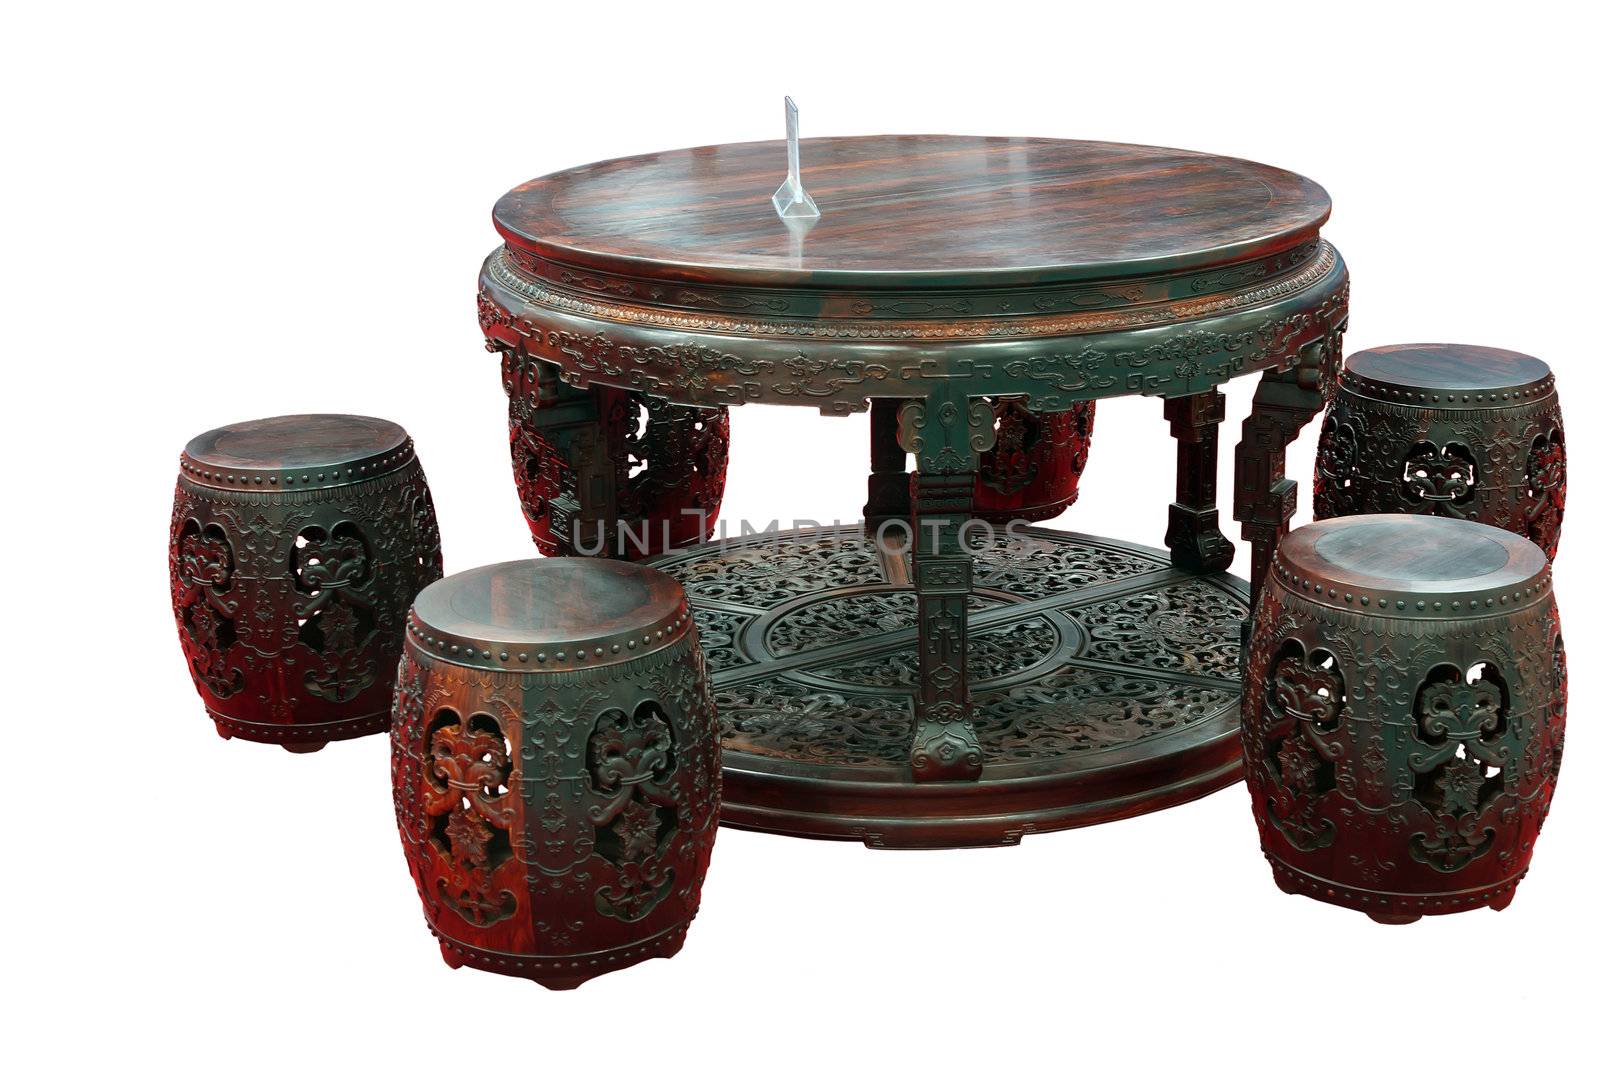 Mahogany furniture - round table and stool by xfdly5